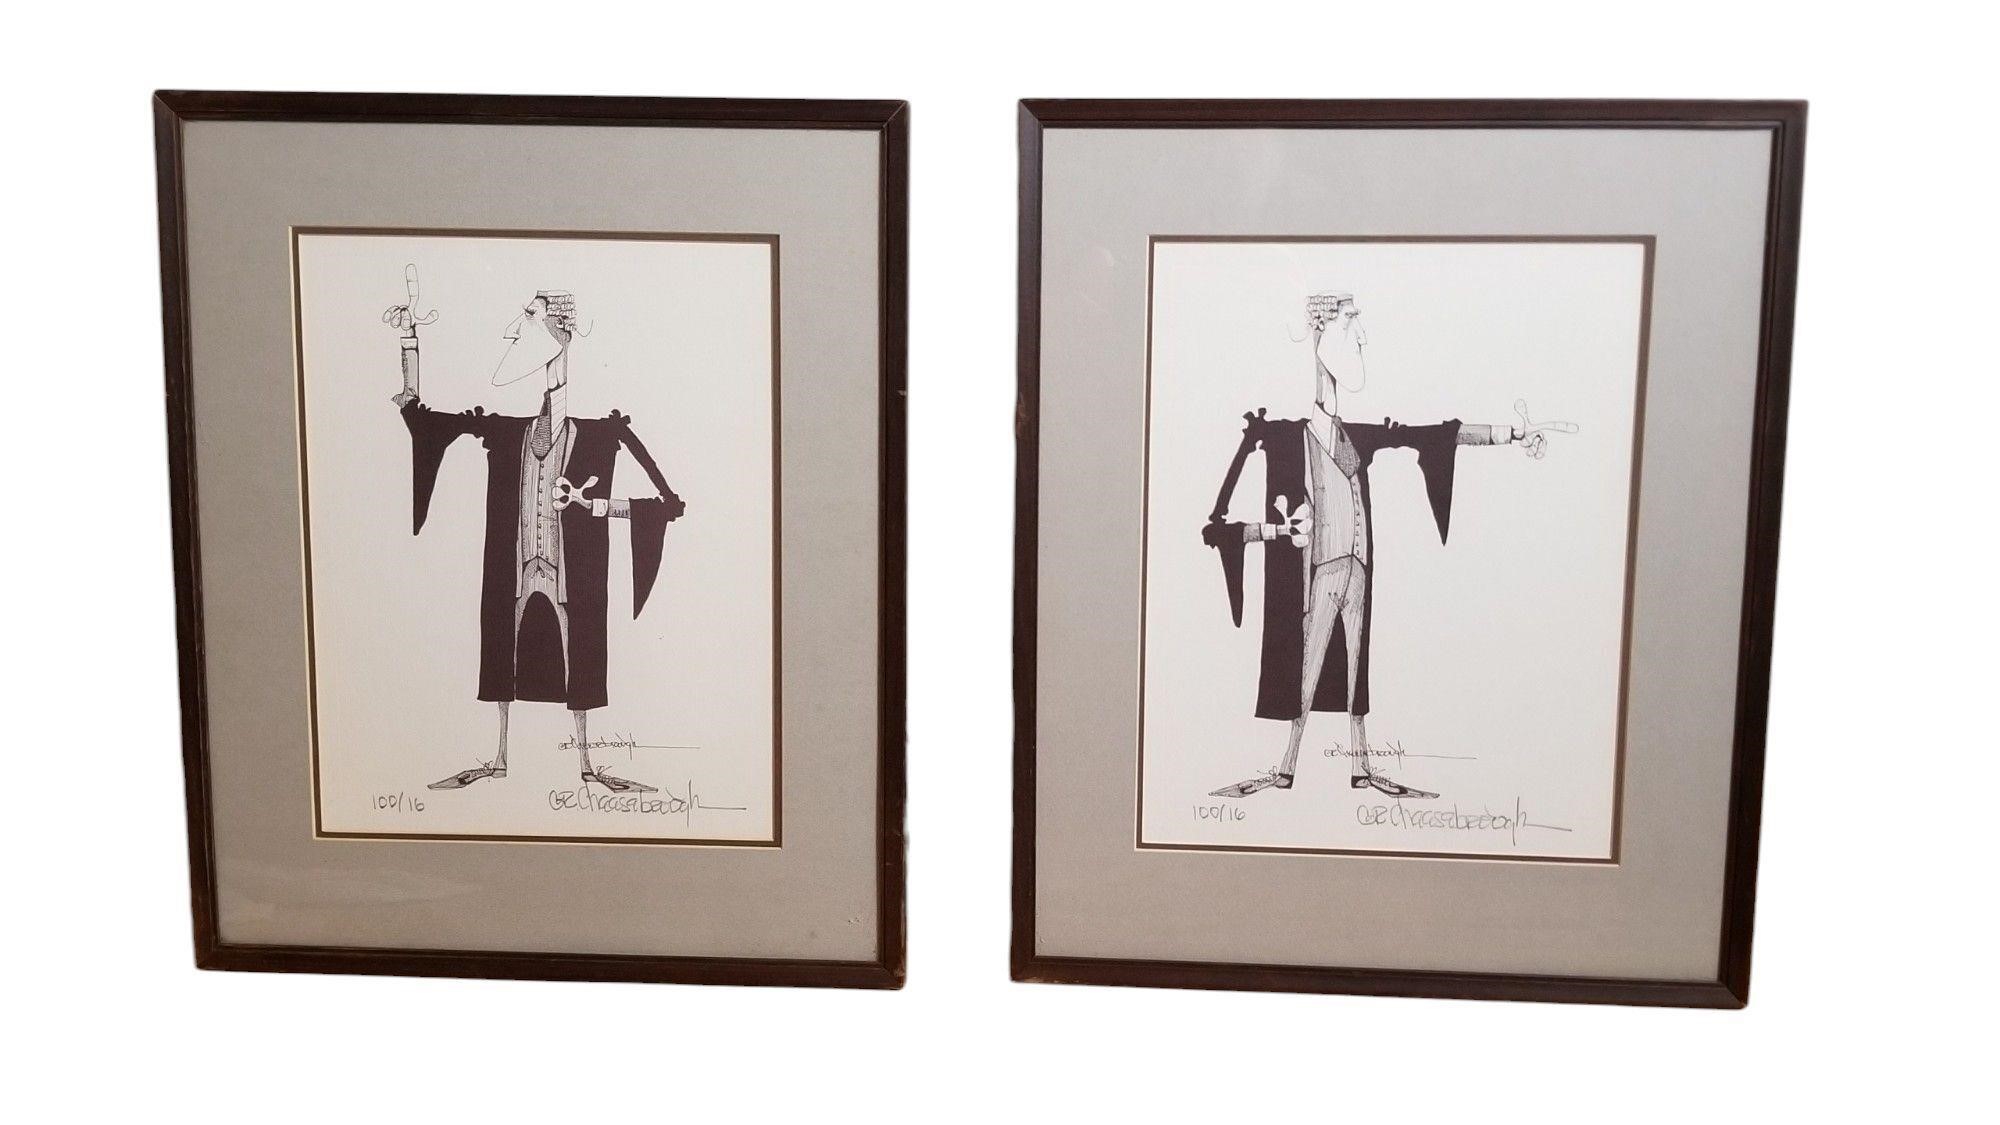 G.R. Cheesebrough Lawyer Signed Numbered